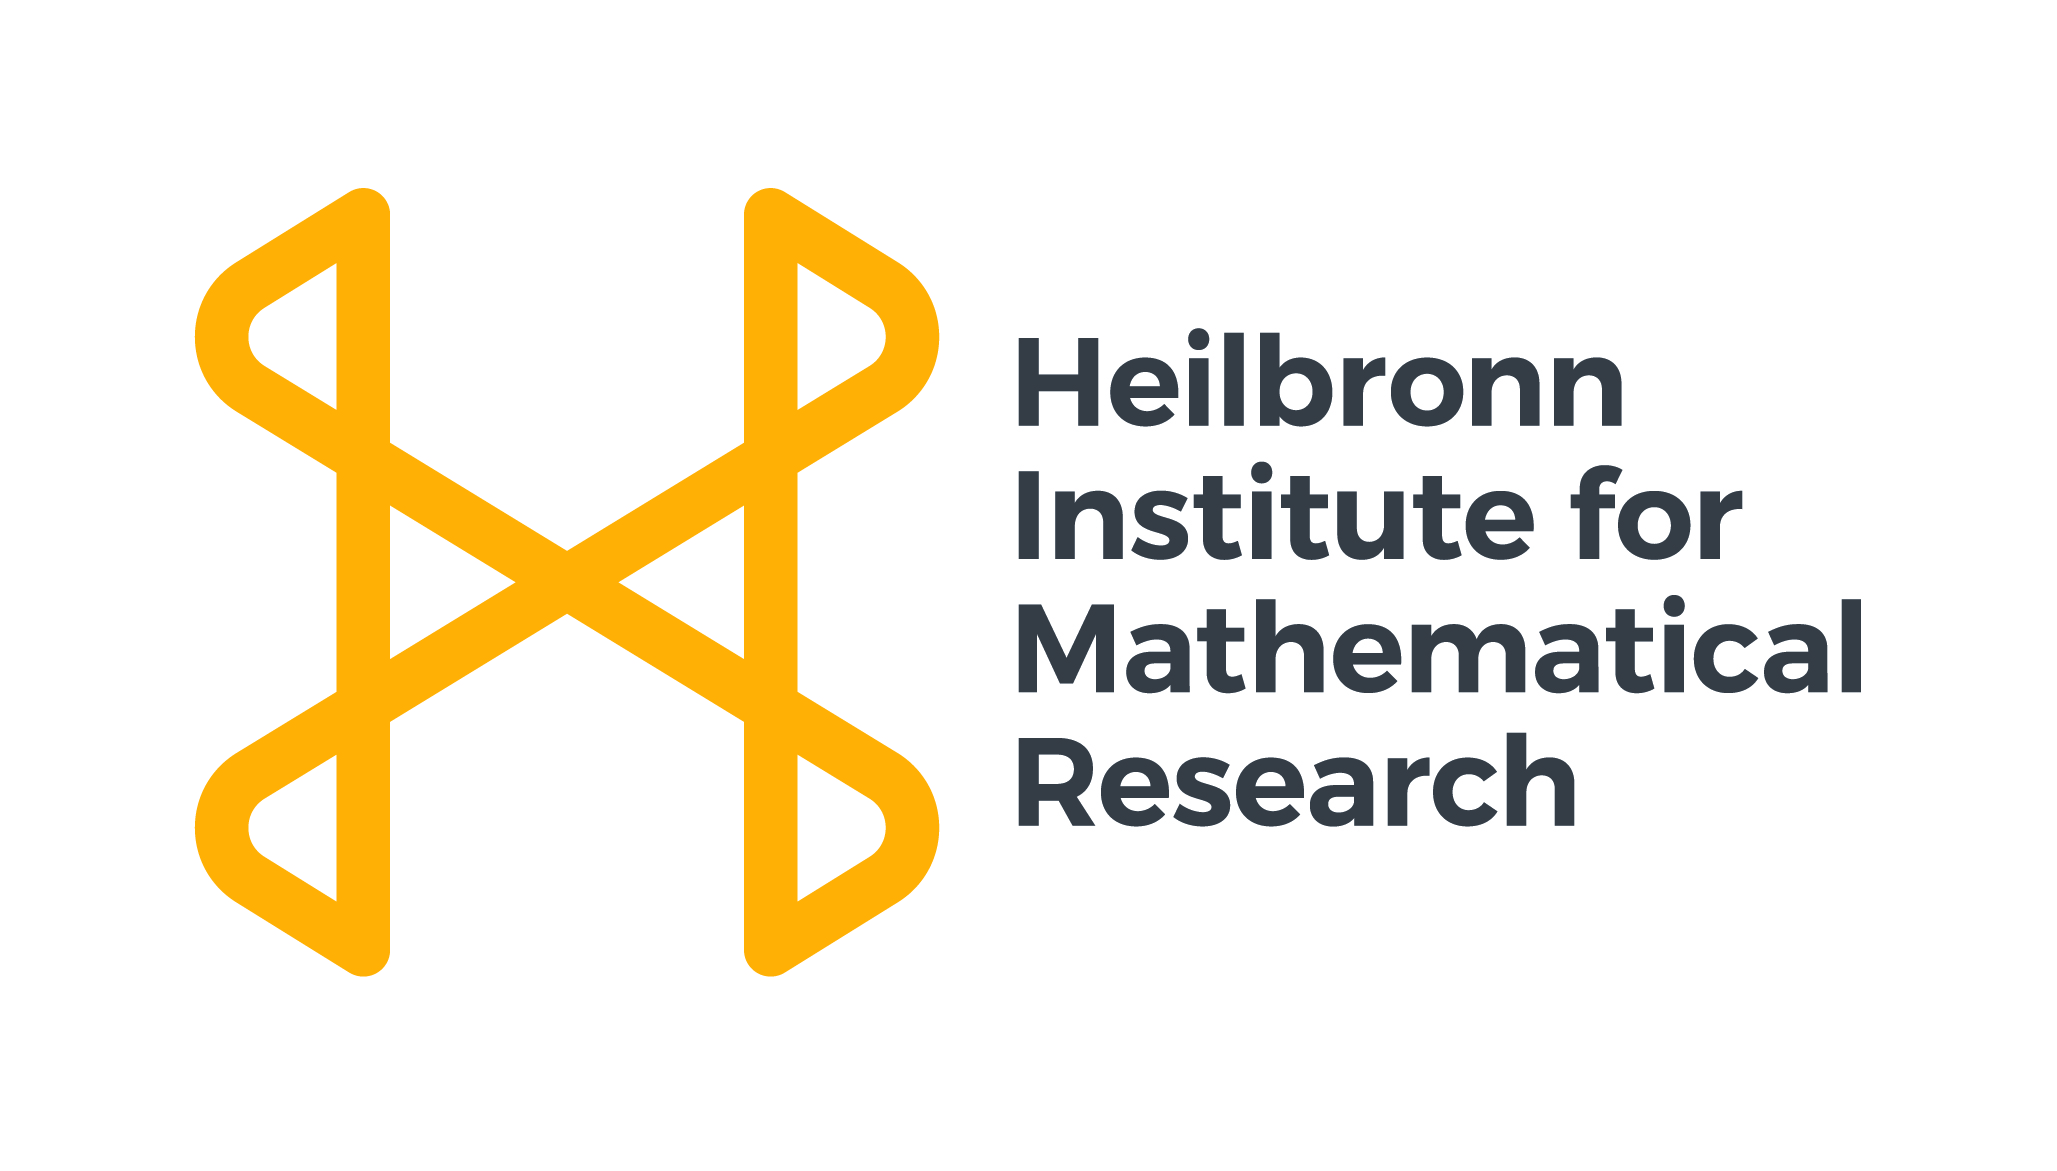 Logo of the Heilbronn Institute for Mathematical Research